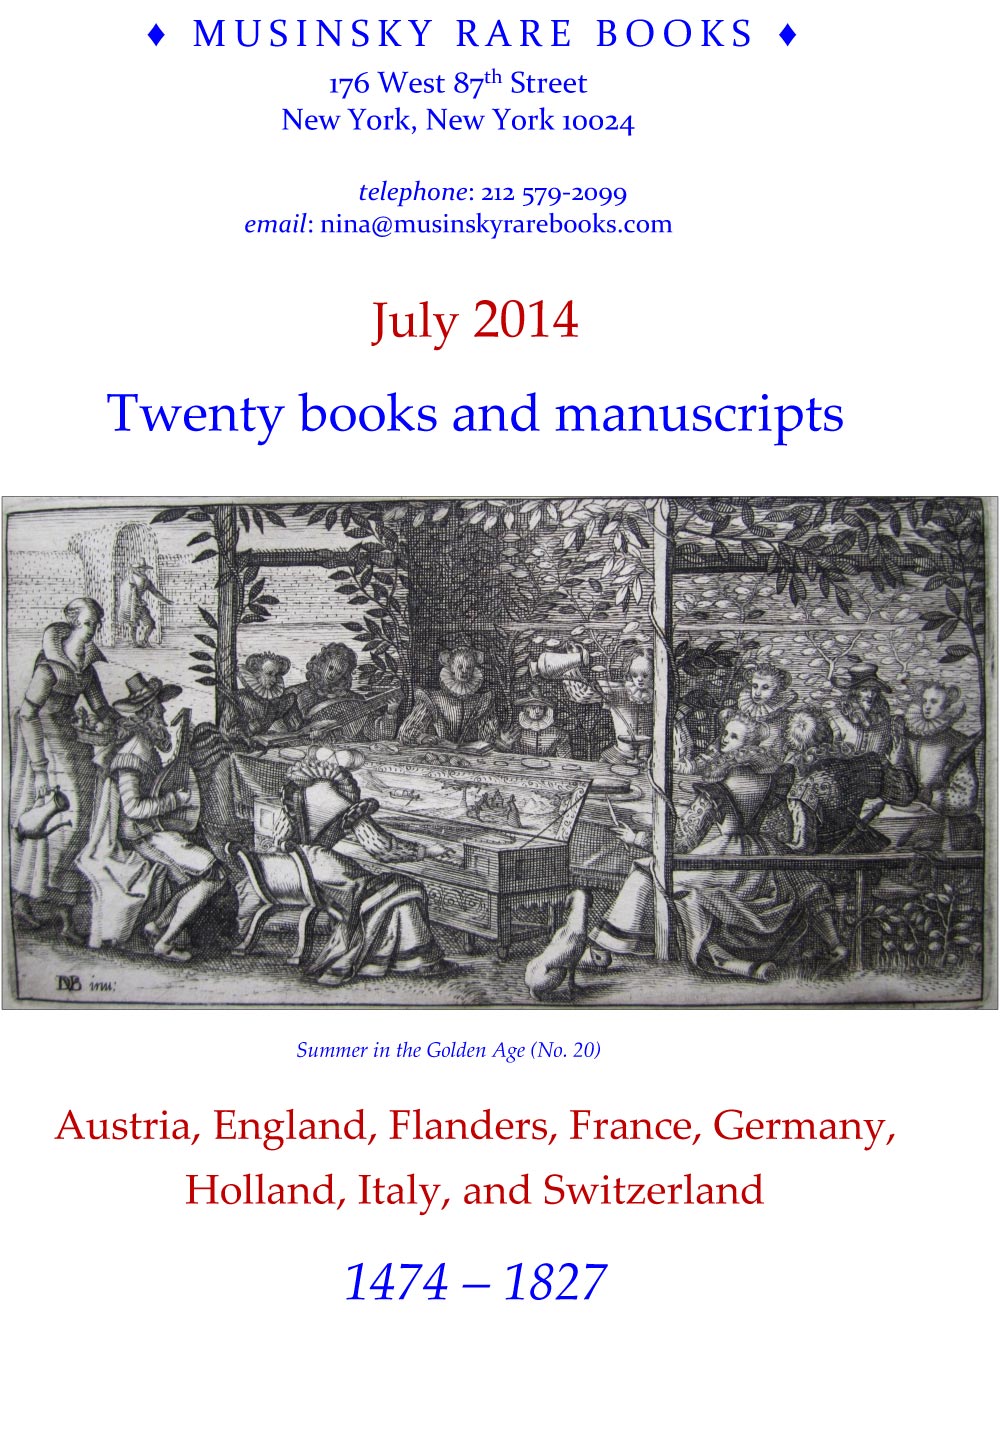 July 2014 - 20 books and manuscripts